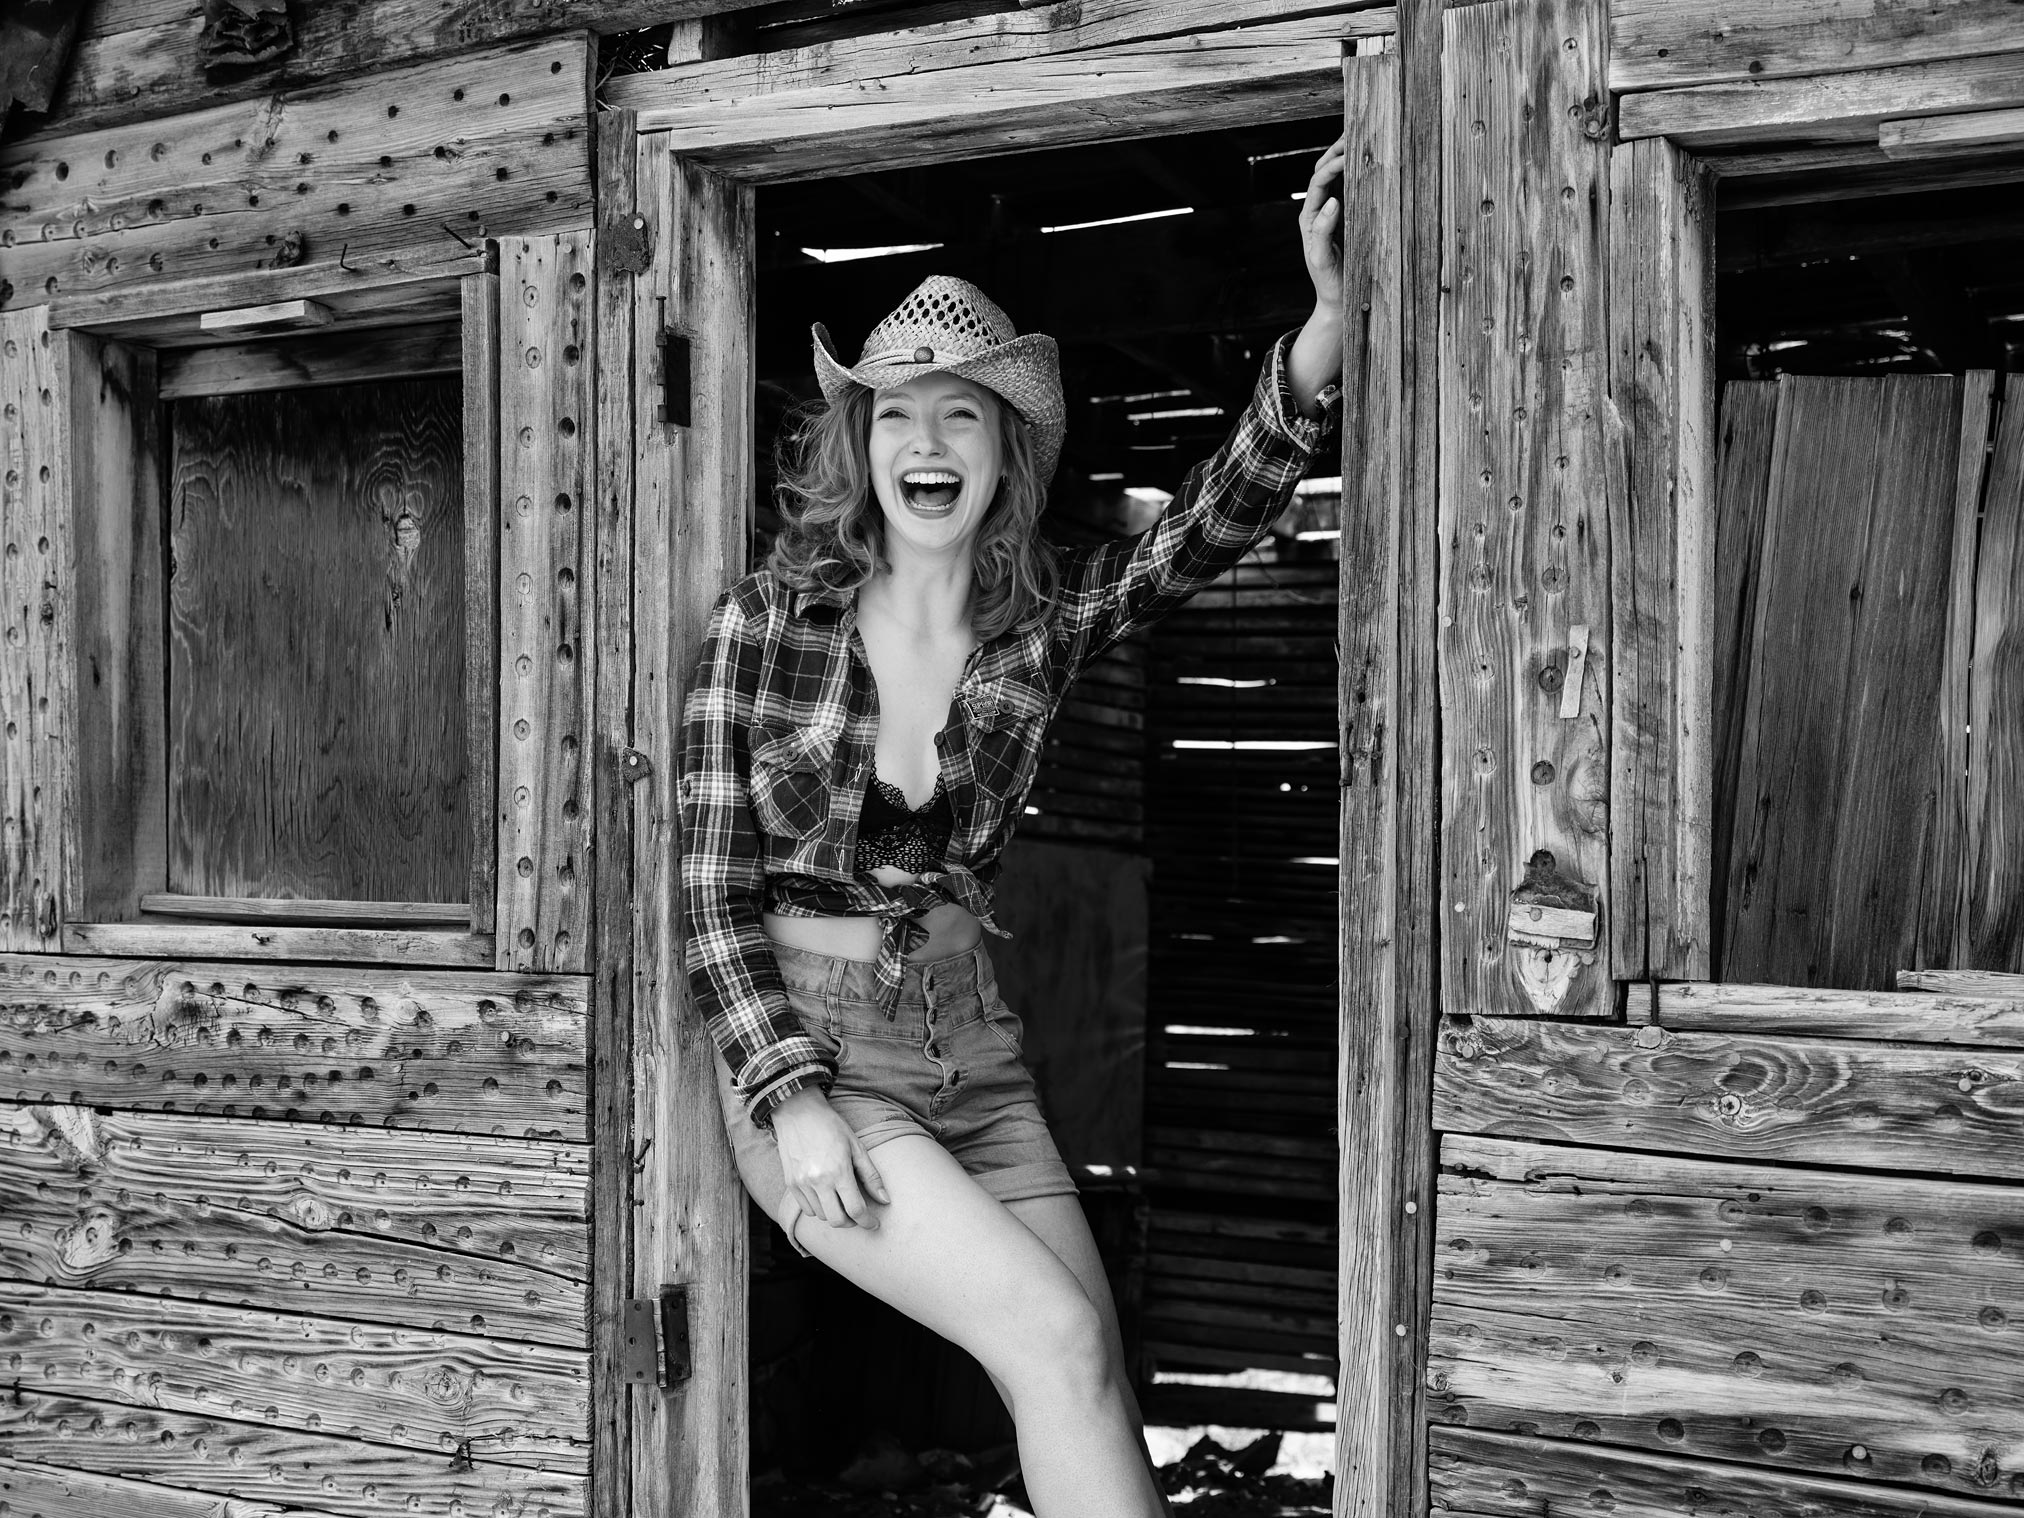 Claire Rammelkamp in a shack in the Wild West USA